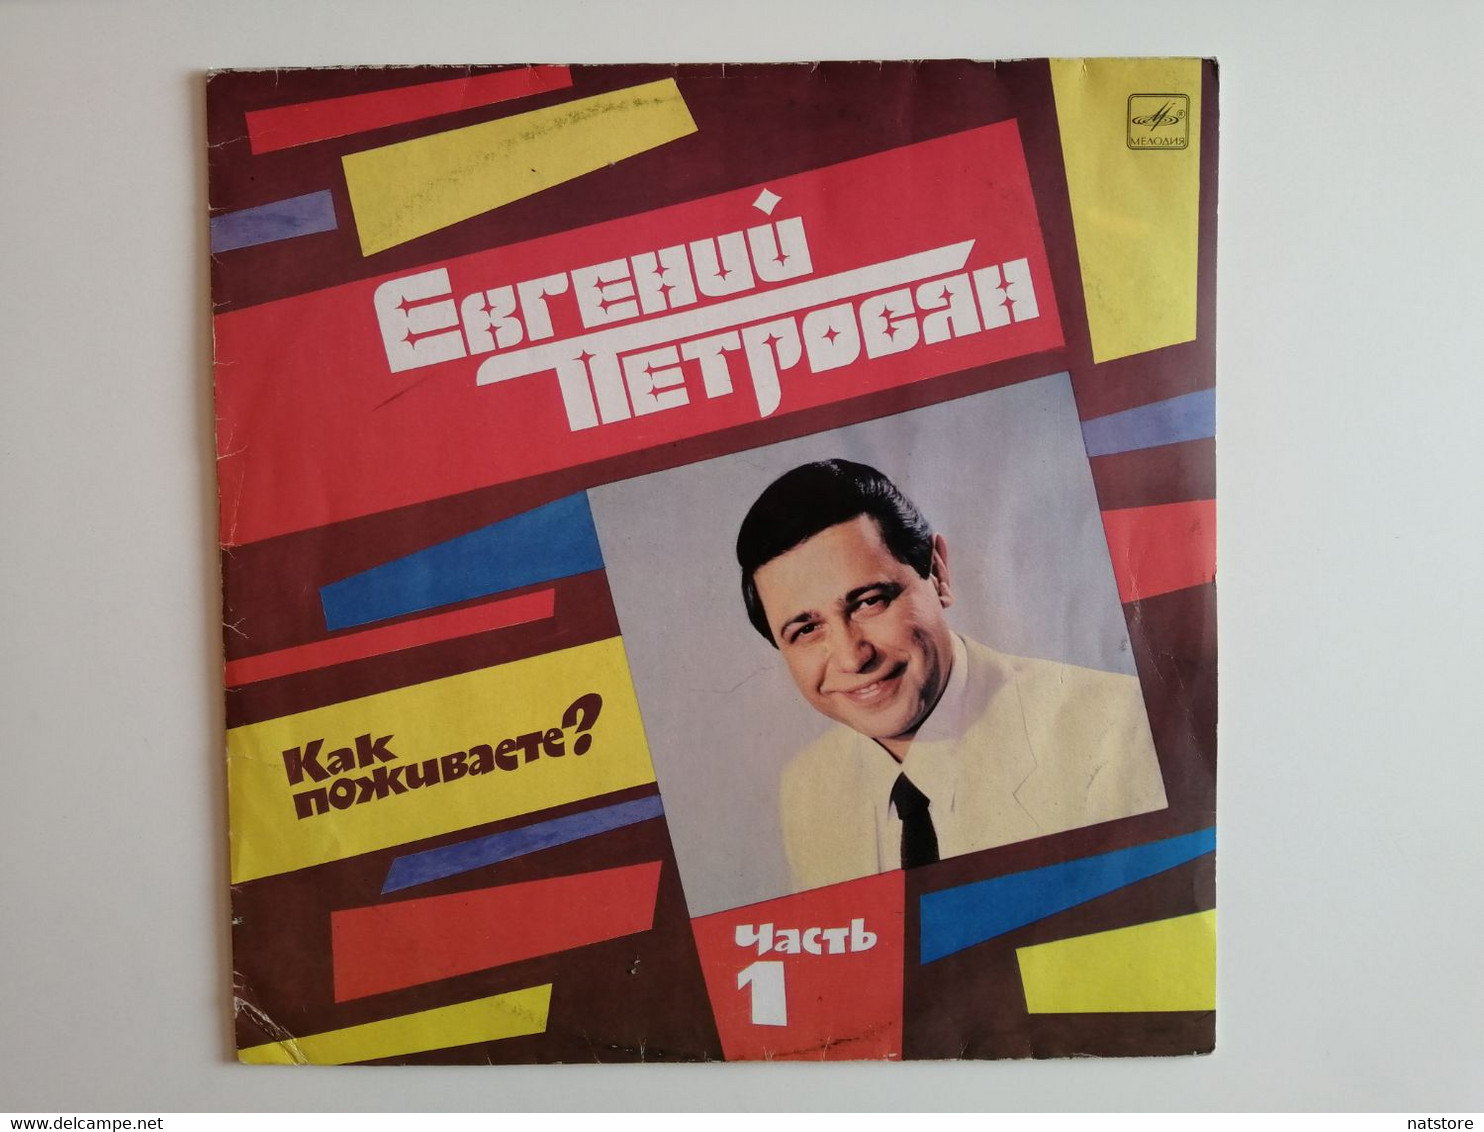 1989..USSR..VINYL RECORDS.HOUSE OF CARDS..EVGENY PETROSYAN..HOW DO YOU LIVE? PART 1 - Humor, Cabaret